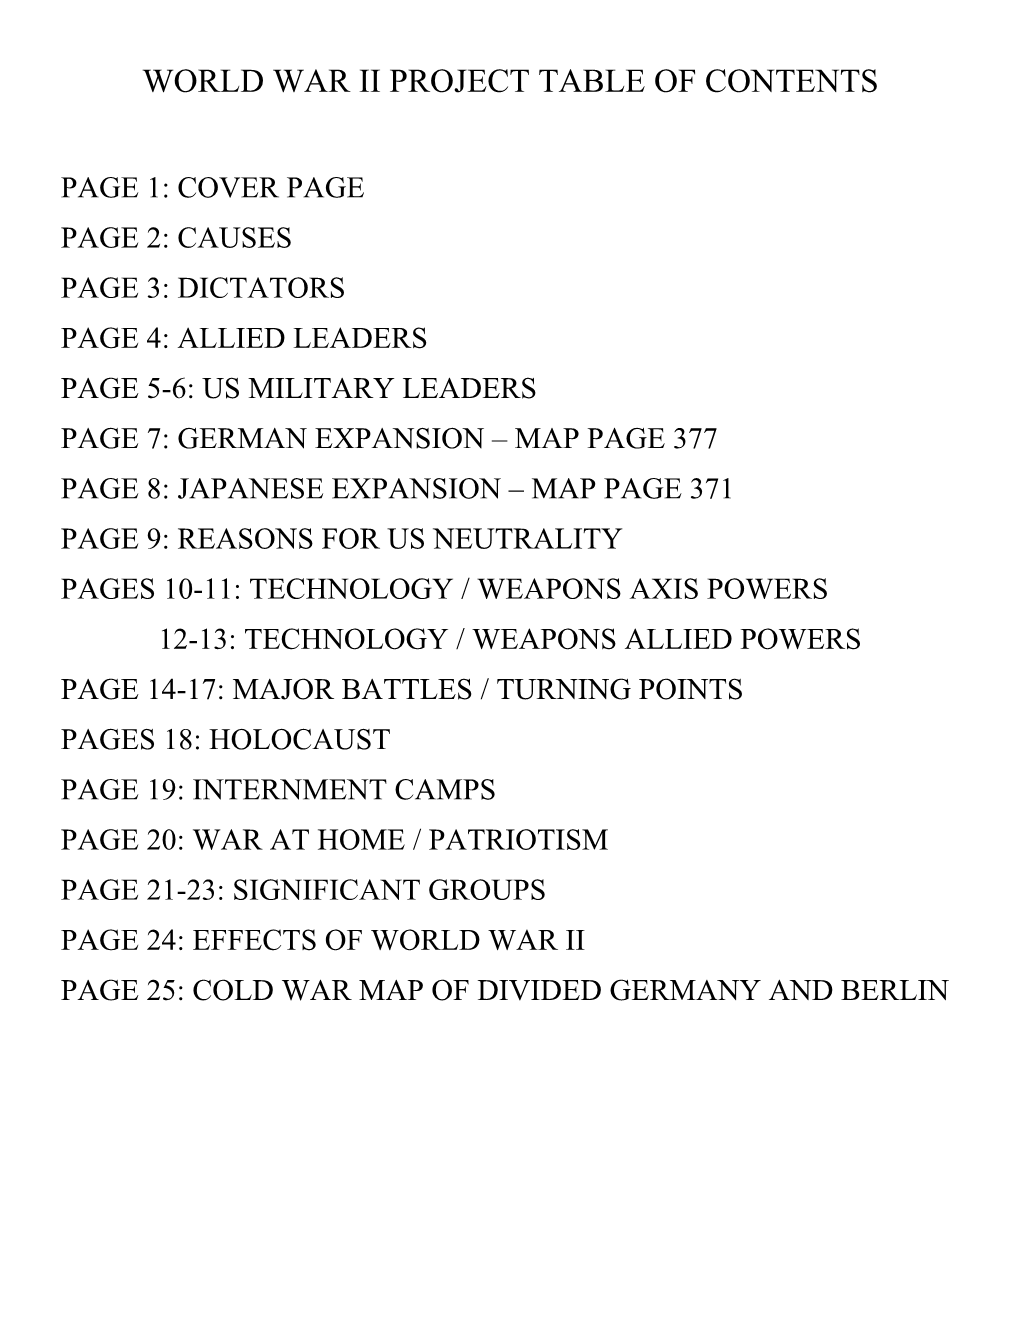 World War Ii Project Table of Contents